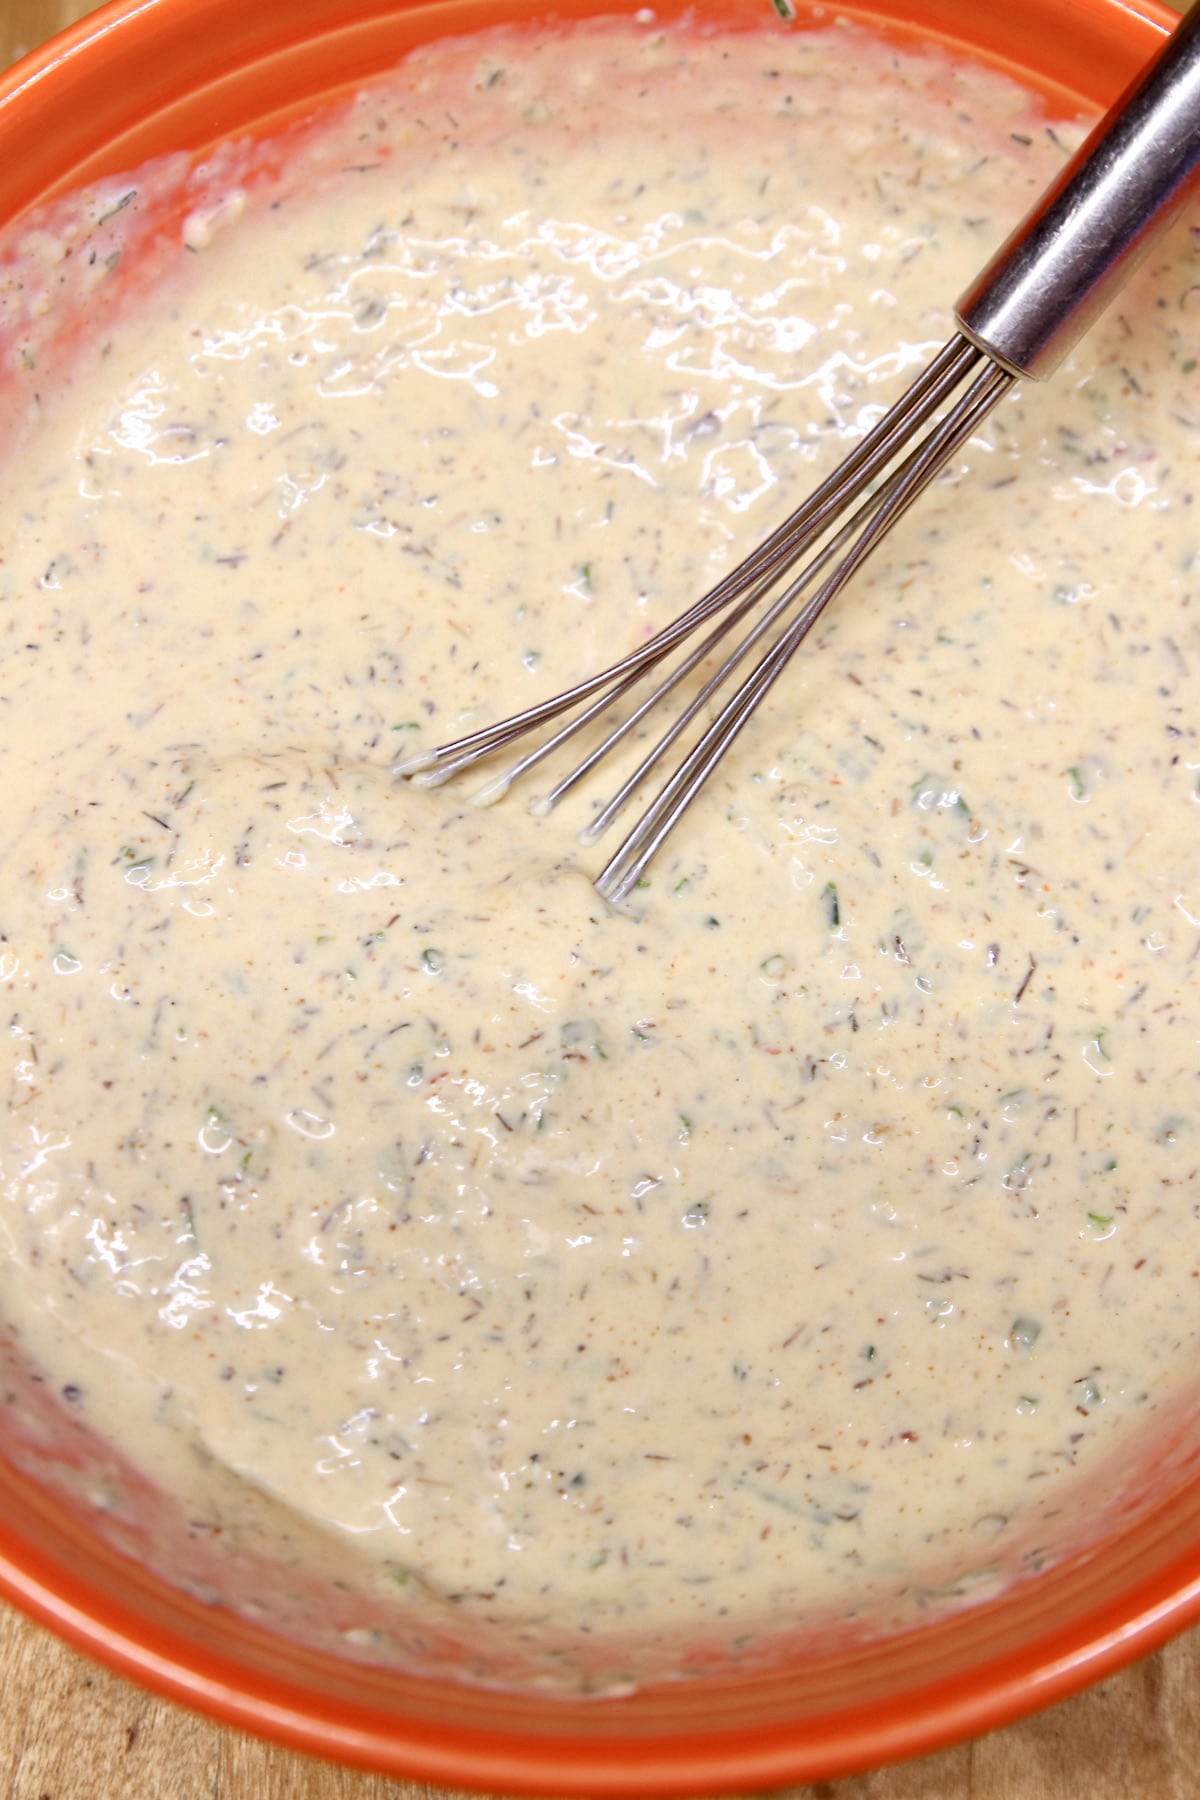 Bowl of garlic cream sauce with whisk.